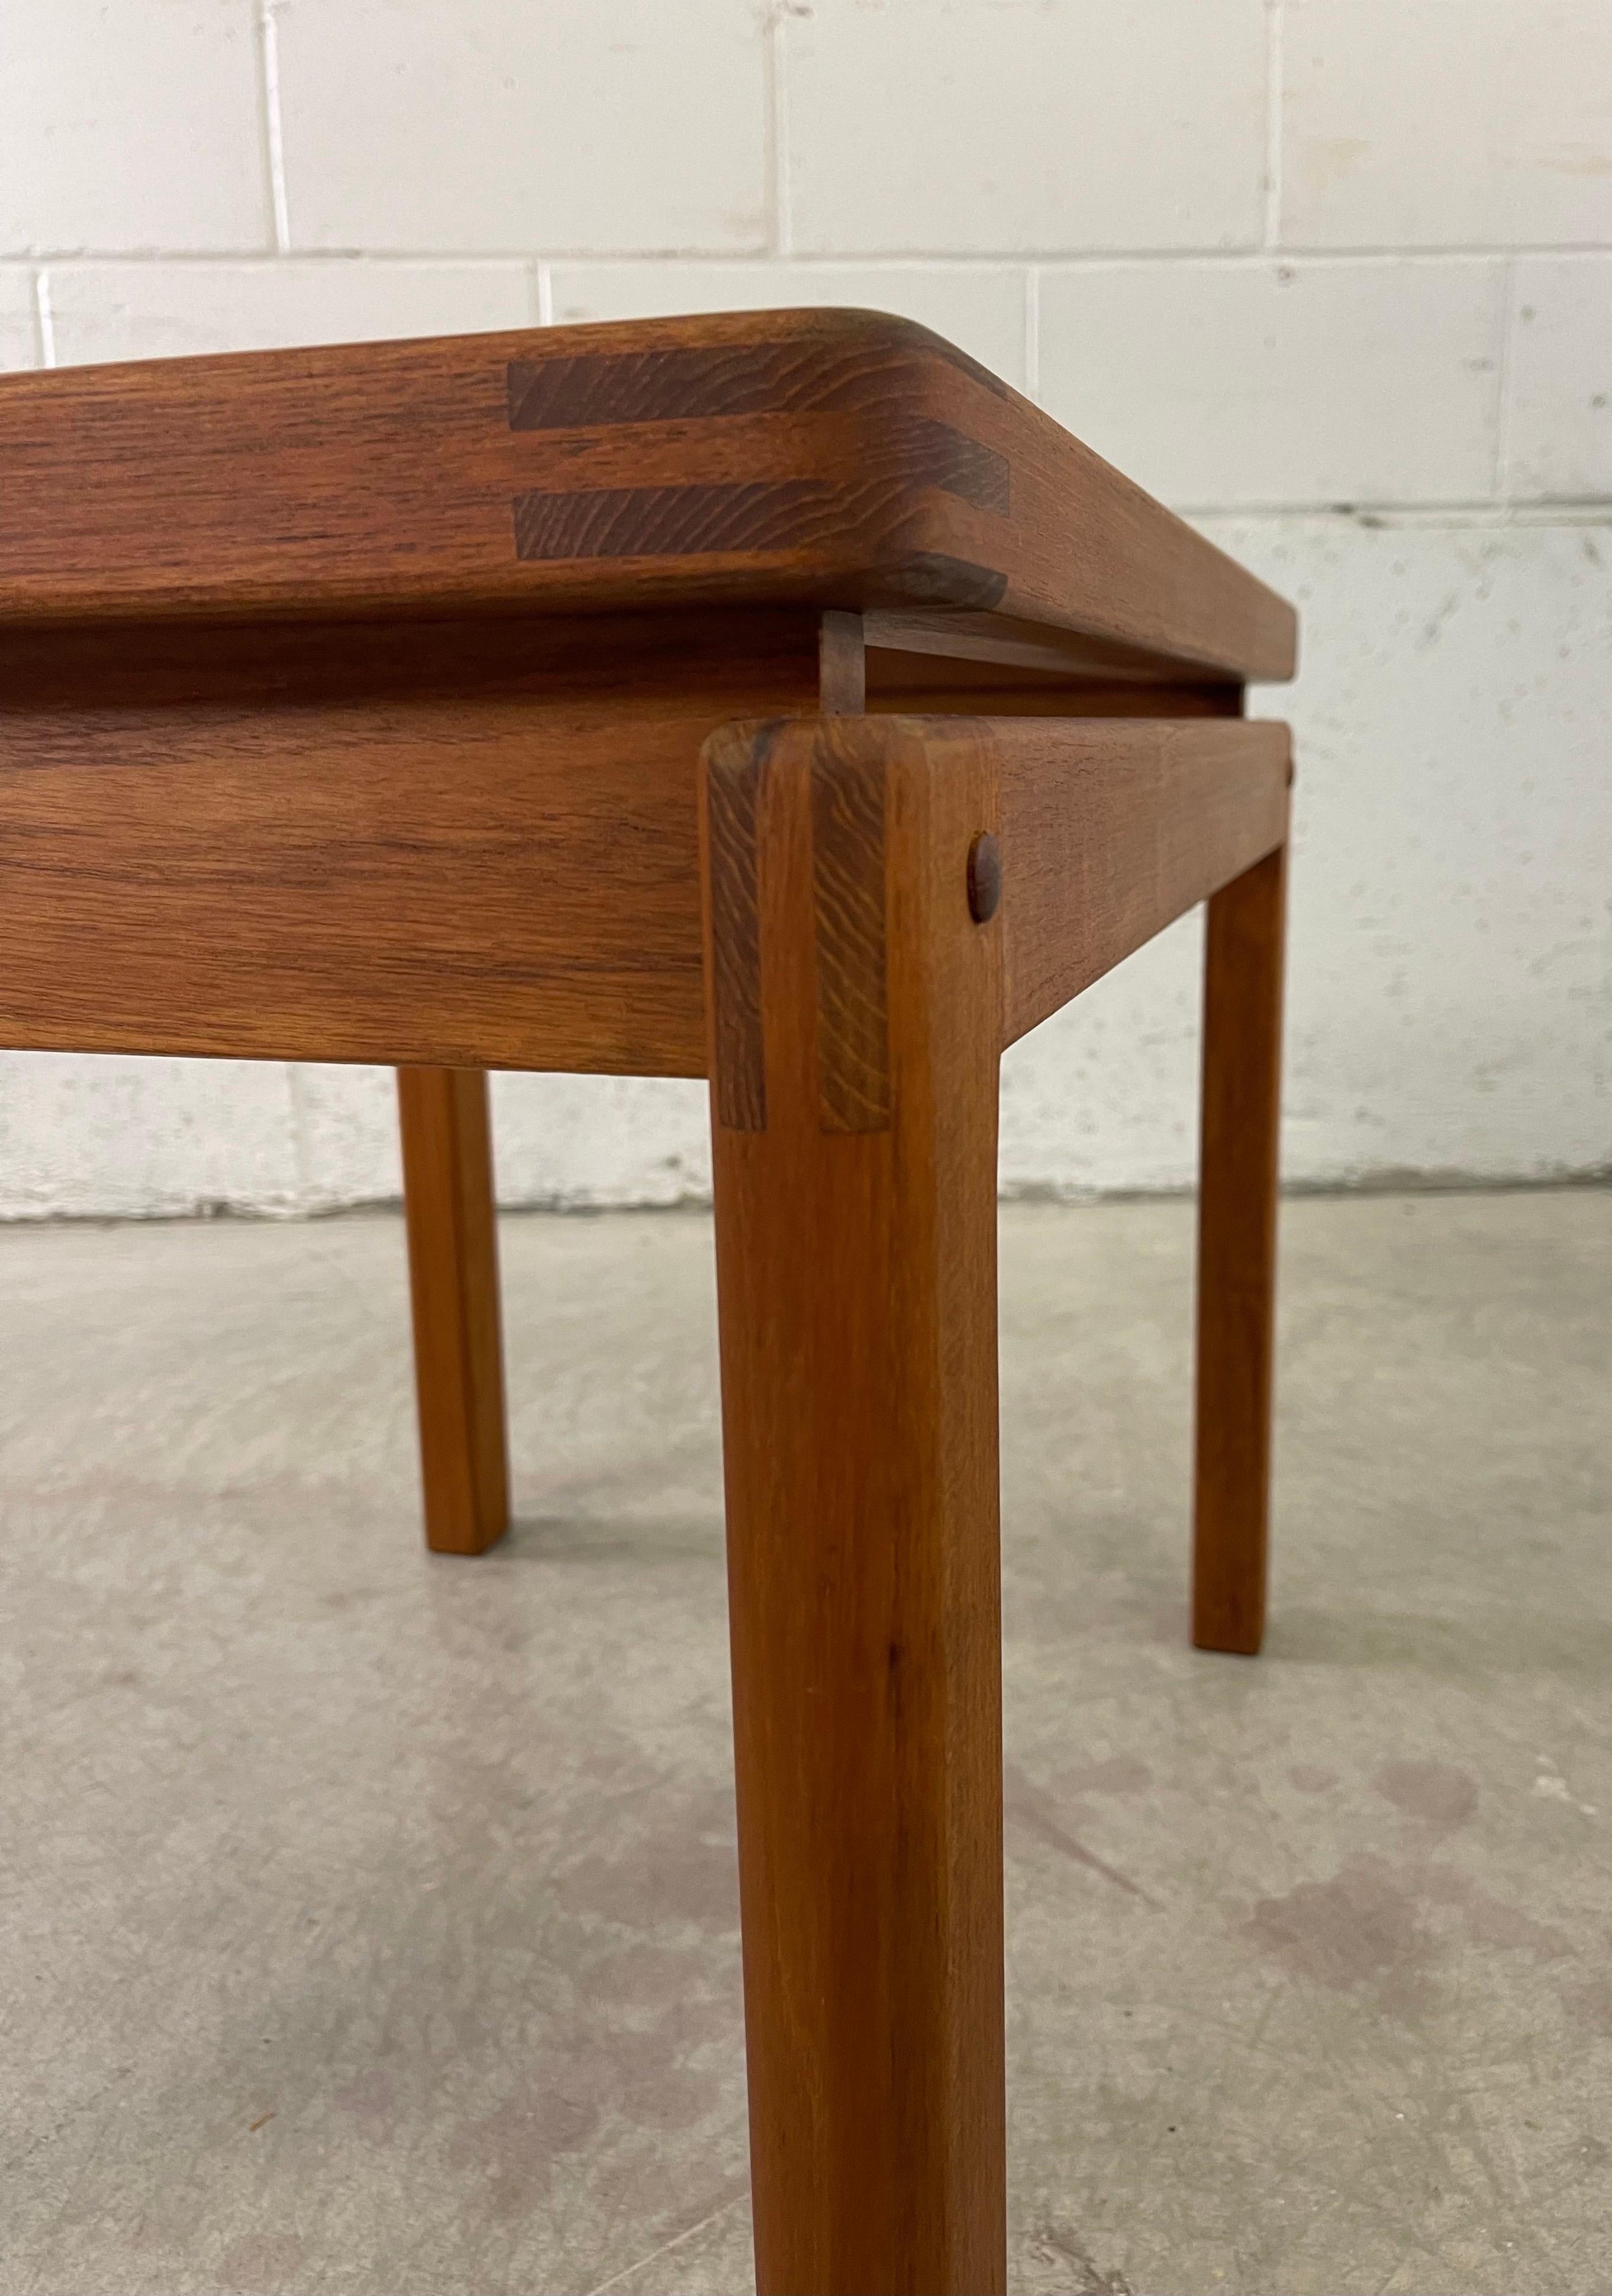 1970s Danish Teak Side Table Smoked Glass Top In Good Condition For Sale In Amherst, NH